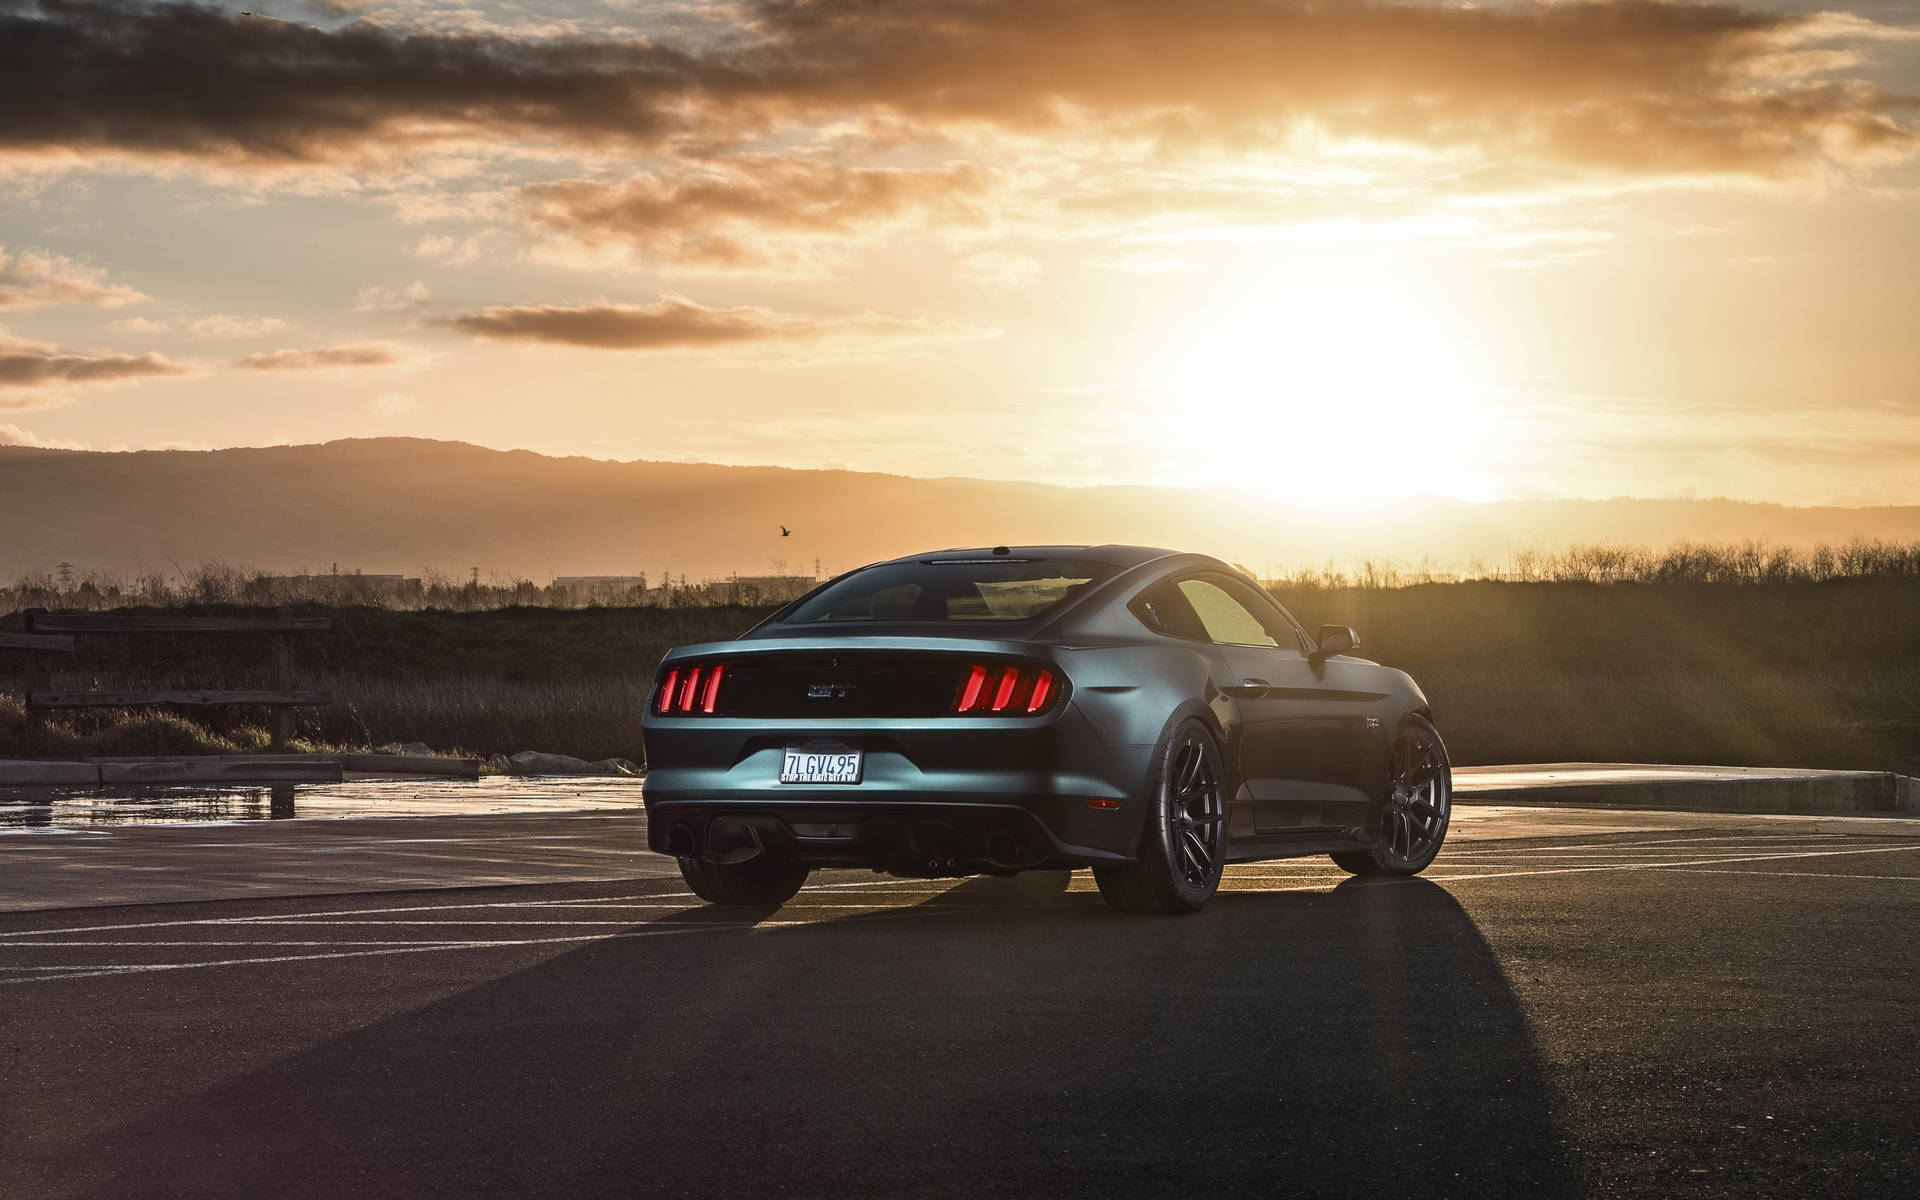 Ford Mustang In Sunset Wallpaper